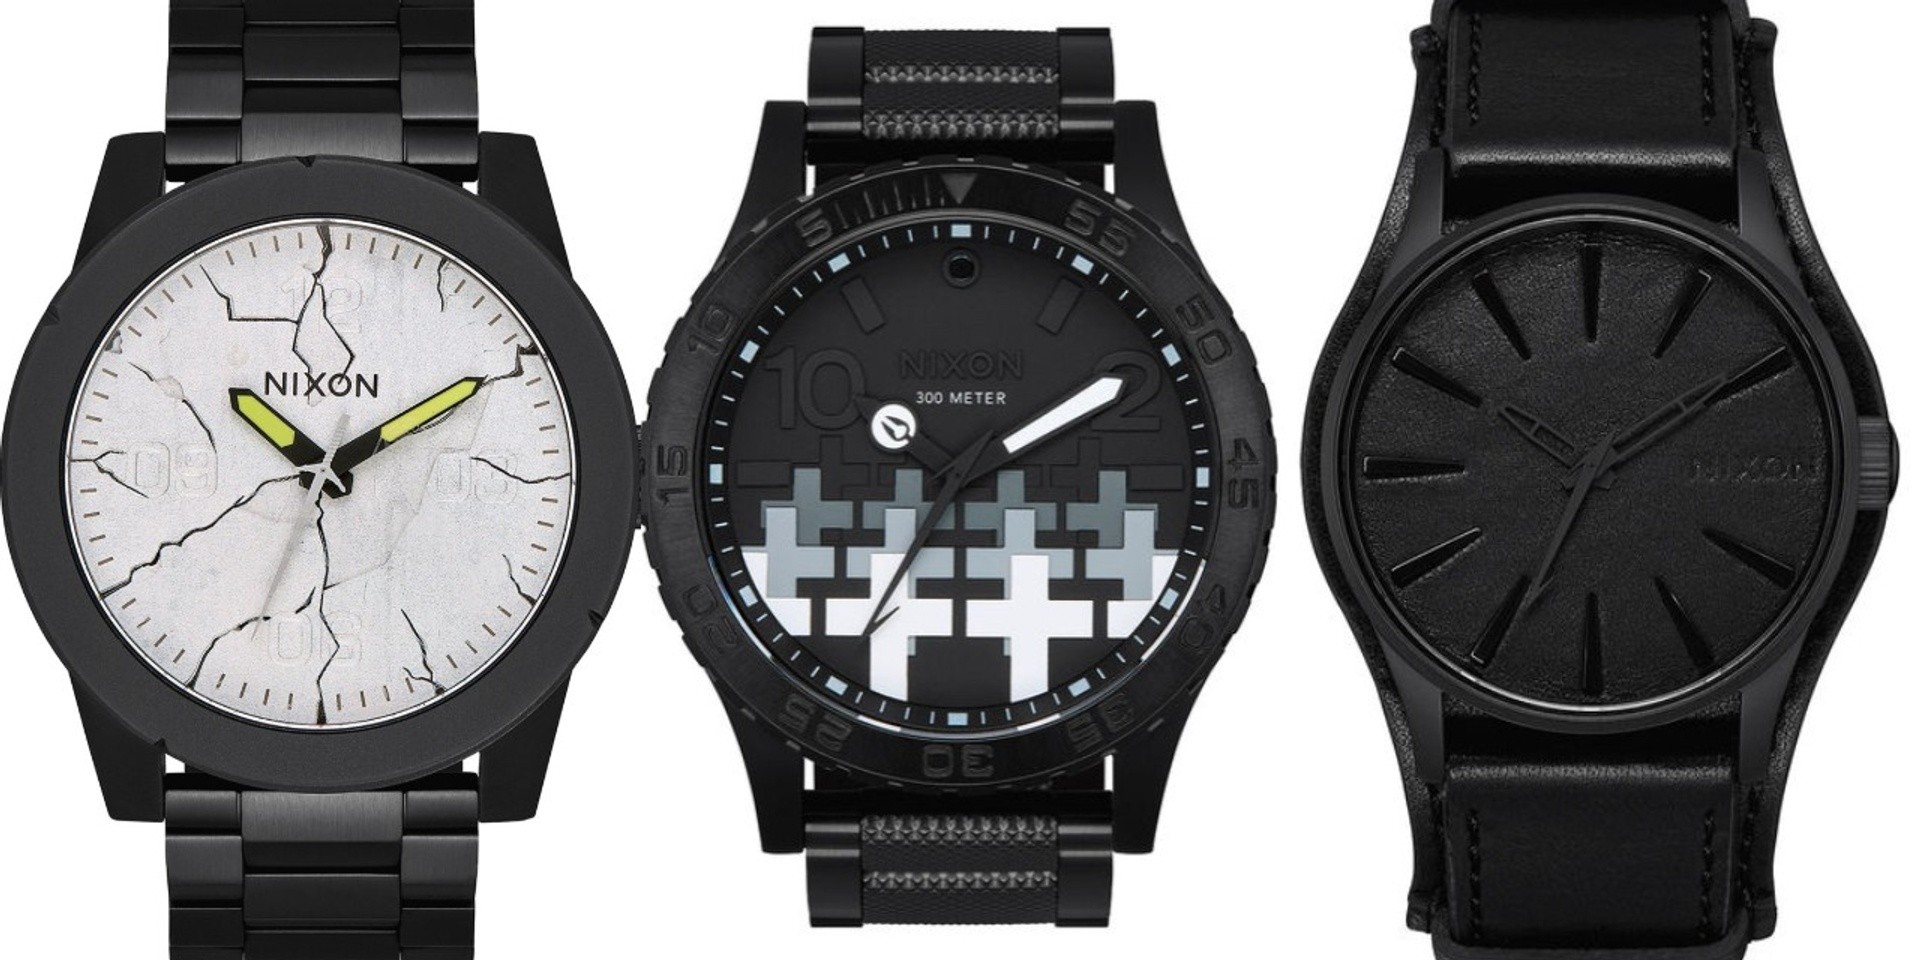 Metallica collaborates with Nixon on new line of watches 